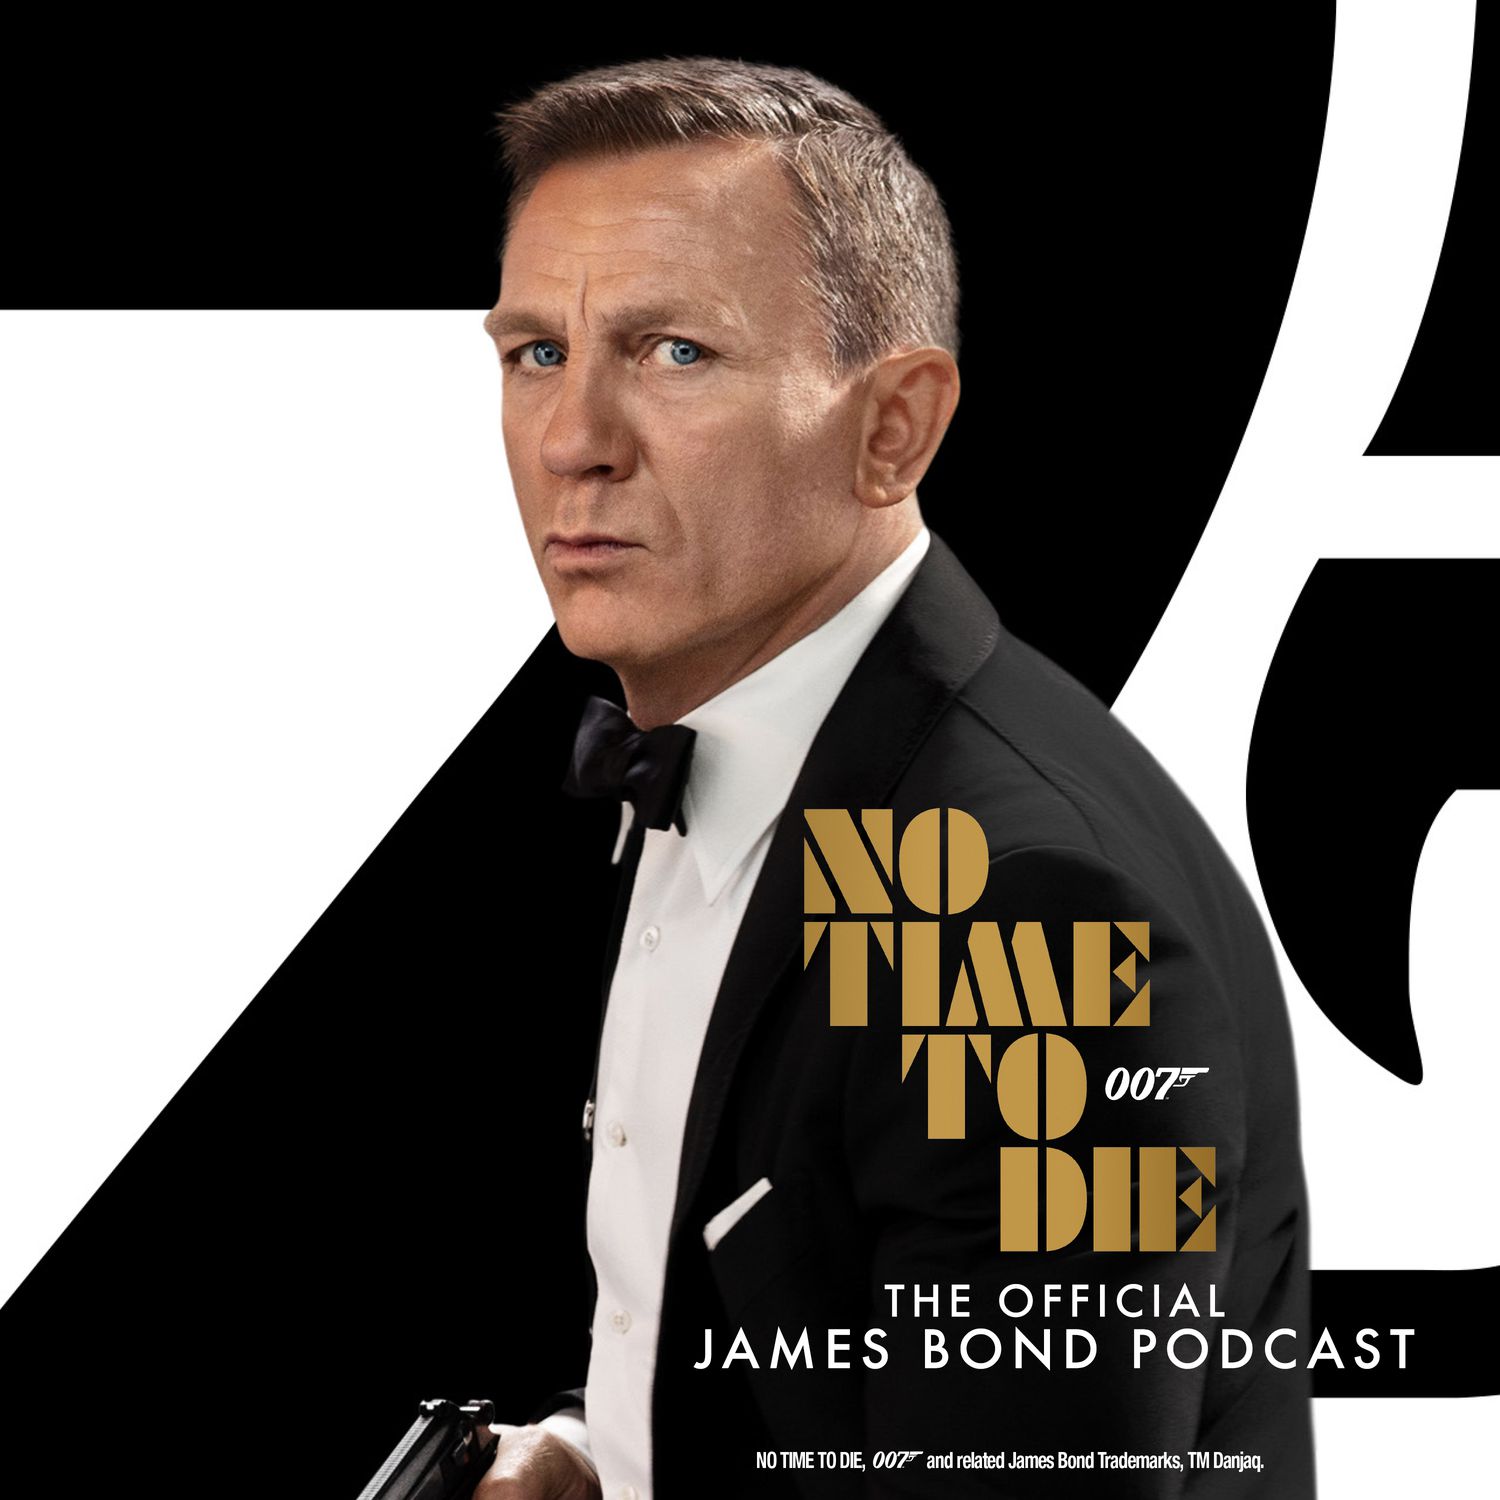 No Time To Die: The Official James Bond Podcast podcast show image